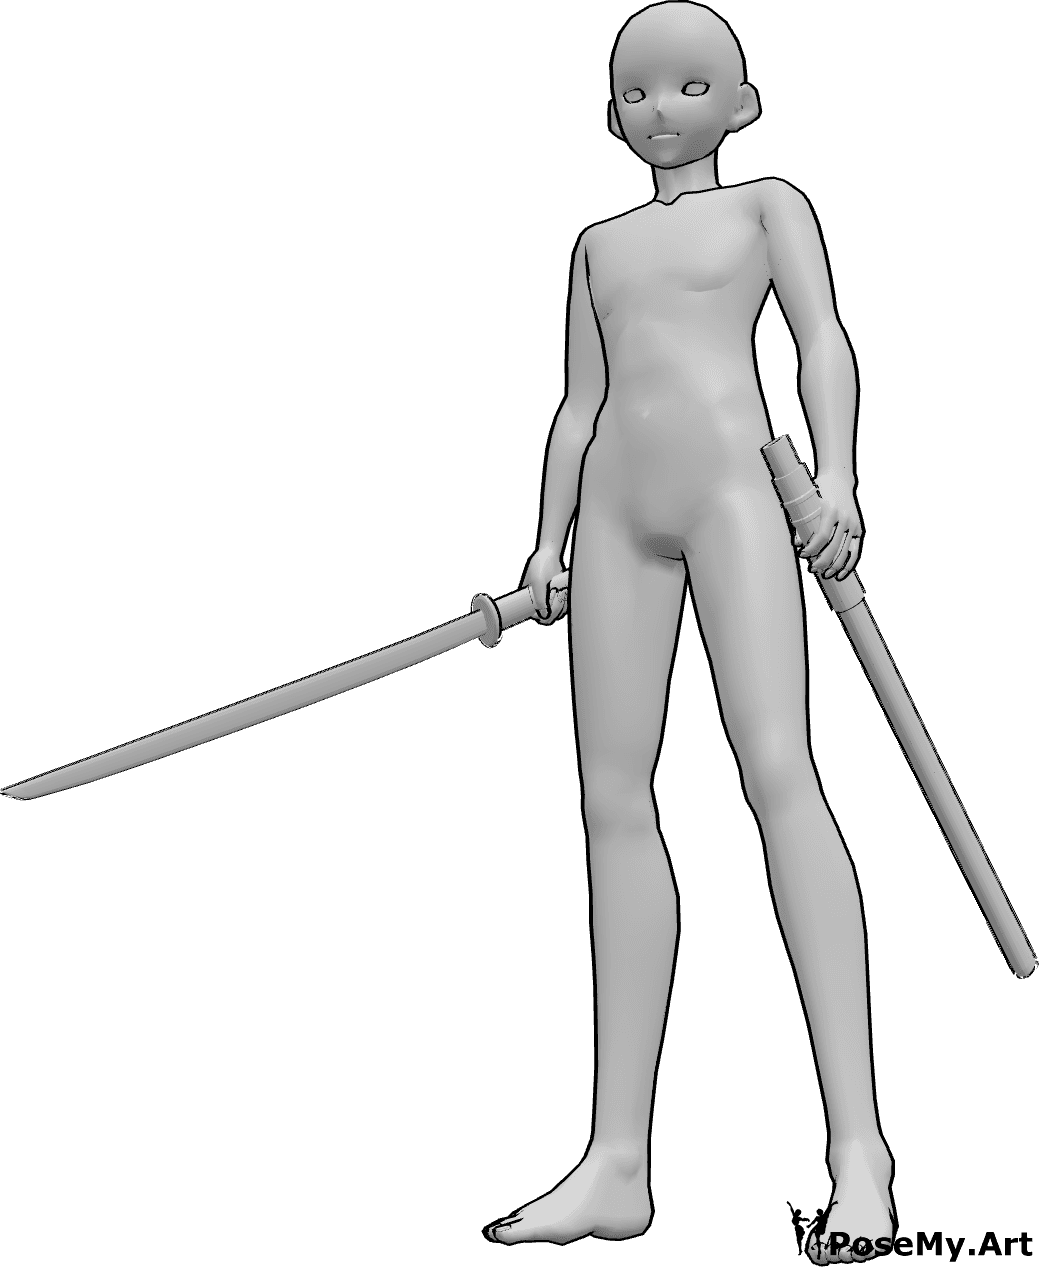 Pose Reference- Holding katana standing pose - Anime male is standing, holding a katana in his right hand and a sheath in his left hand